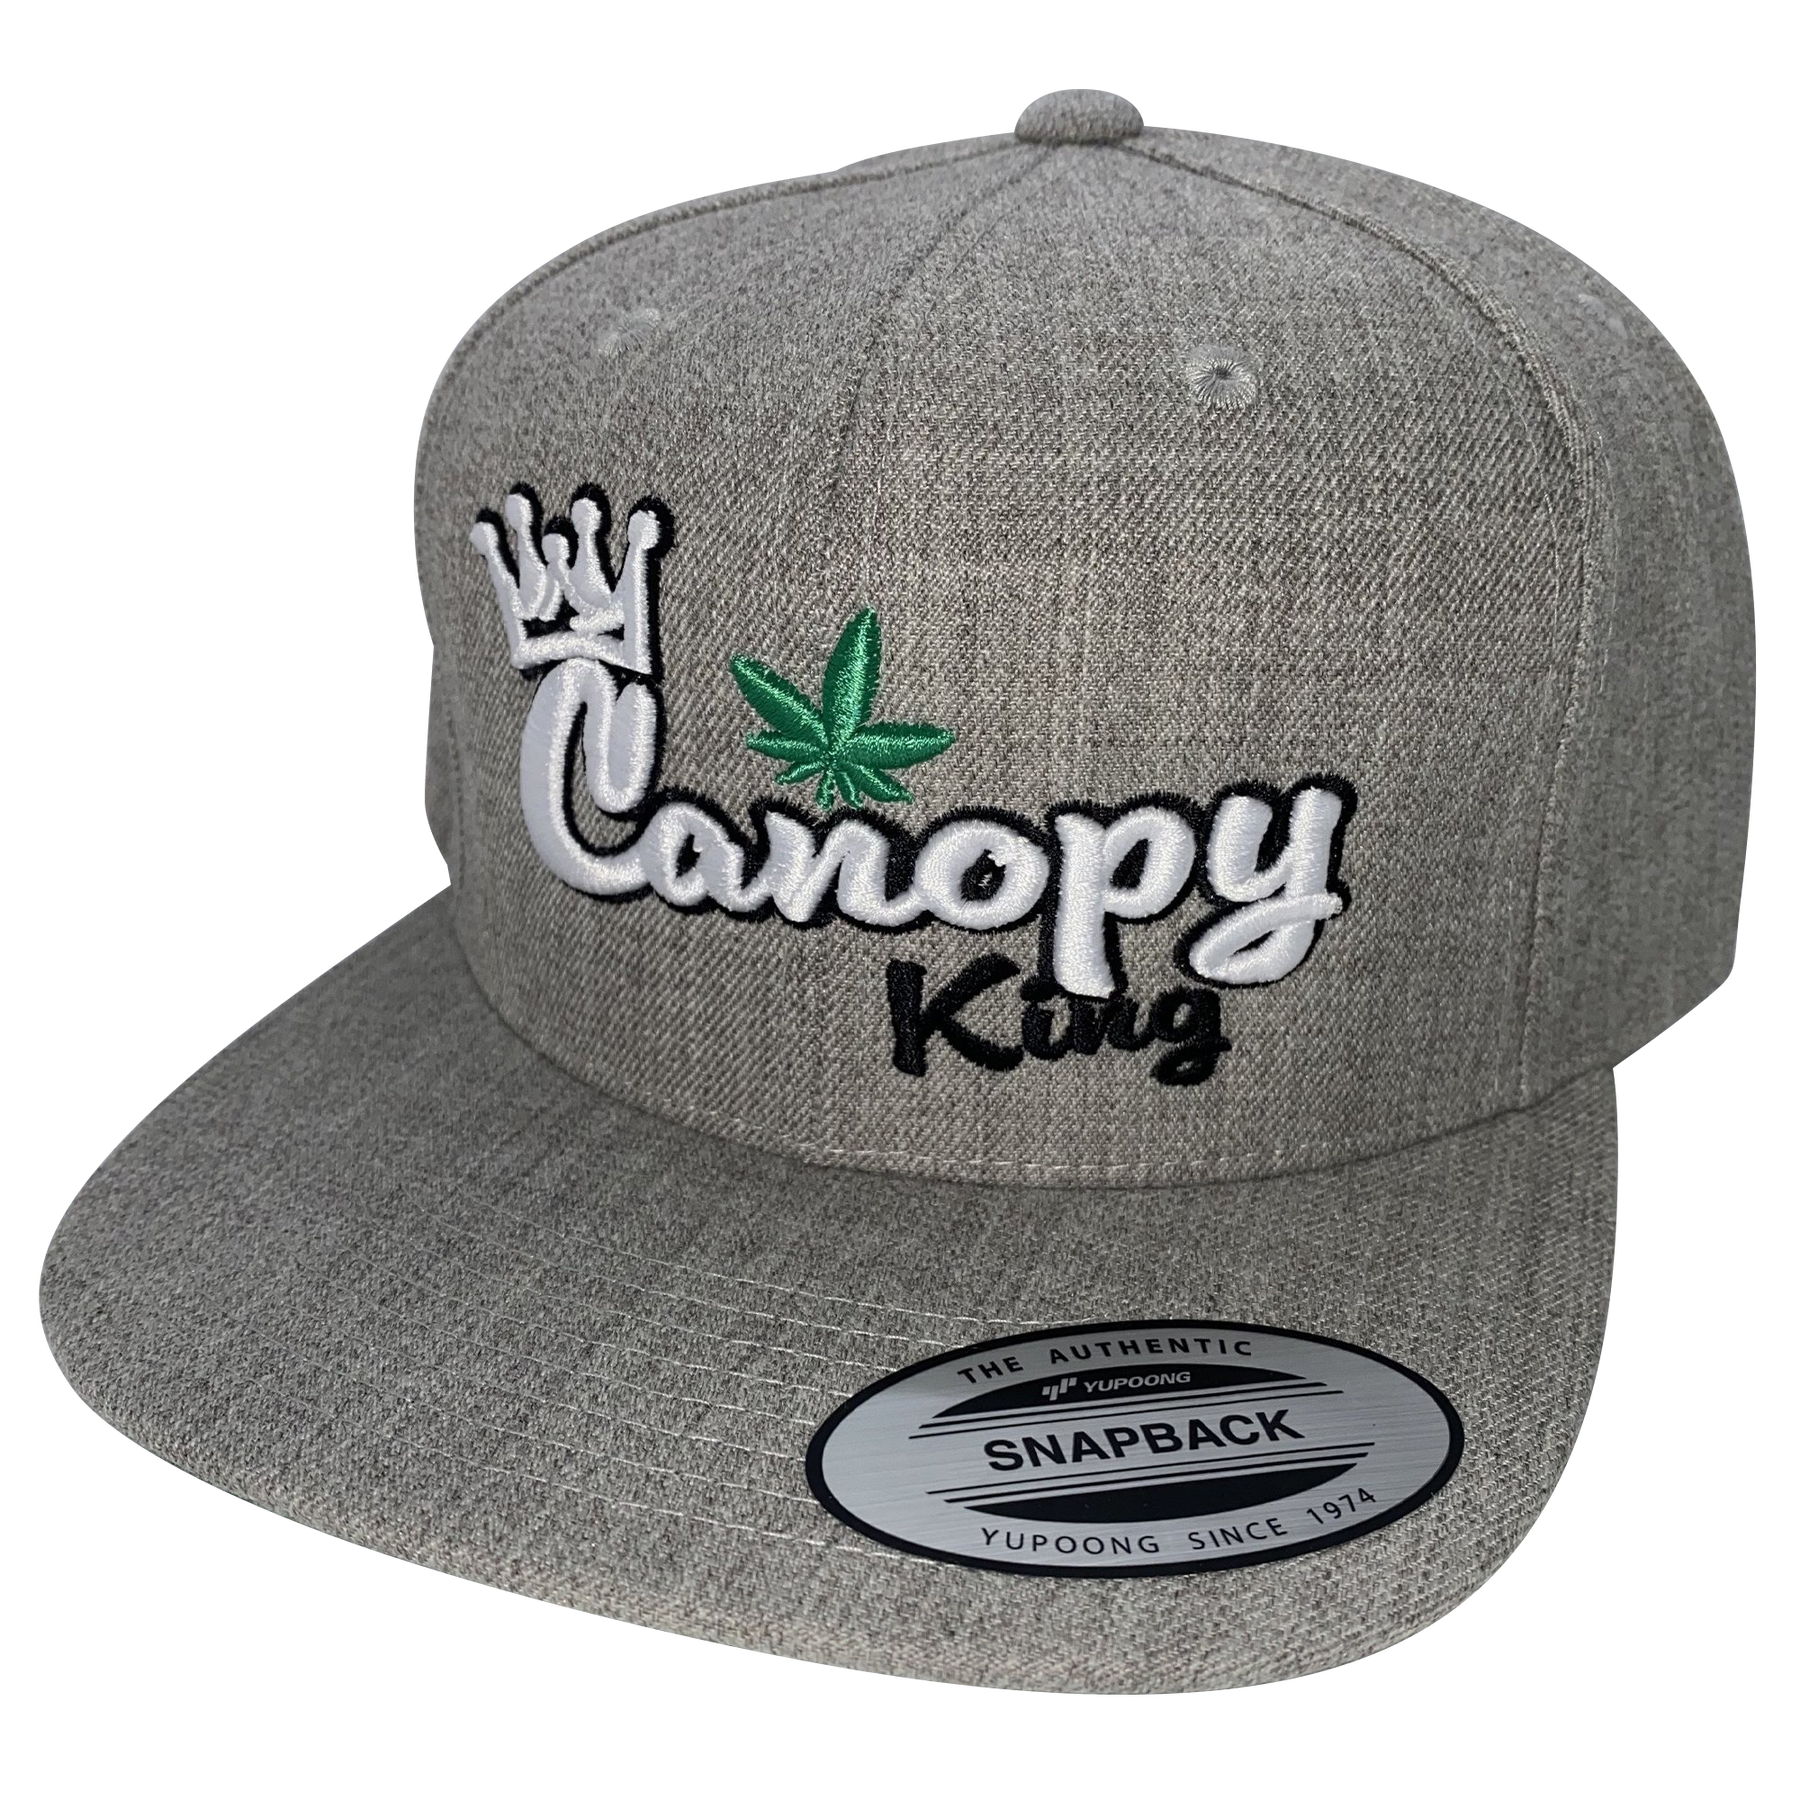 Canopy King Hat